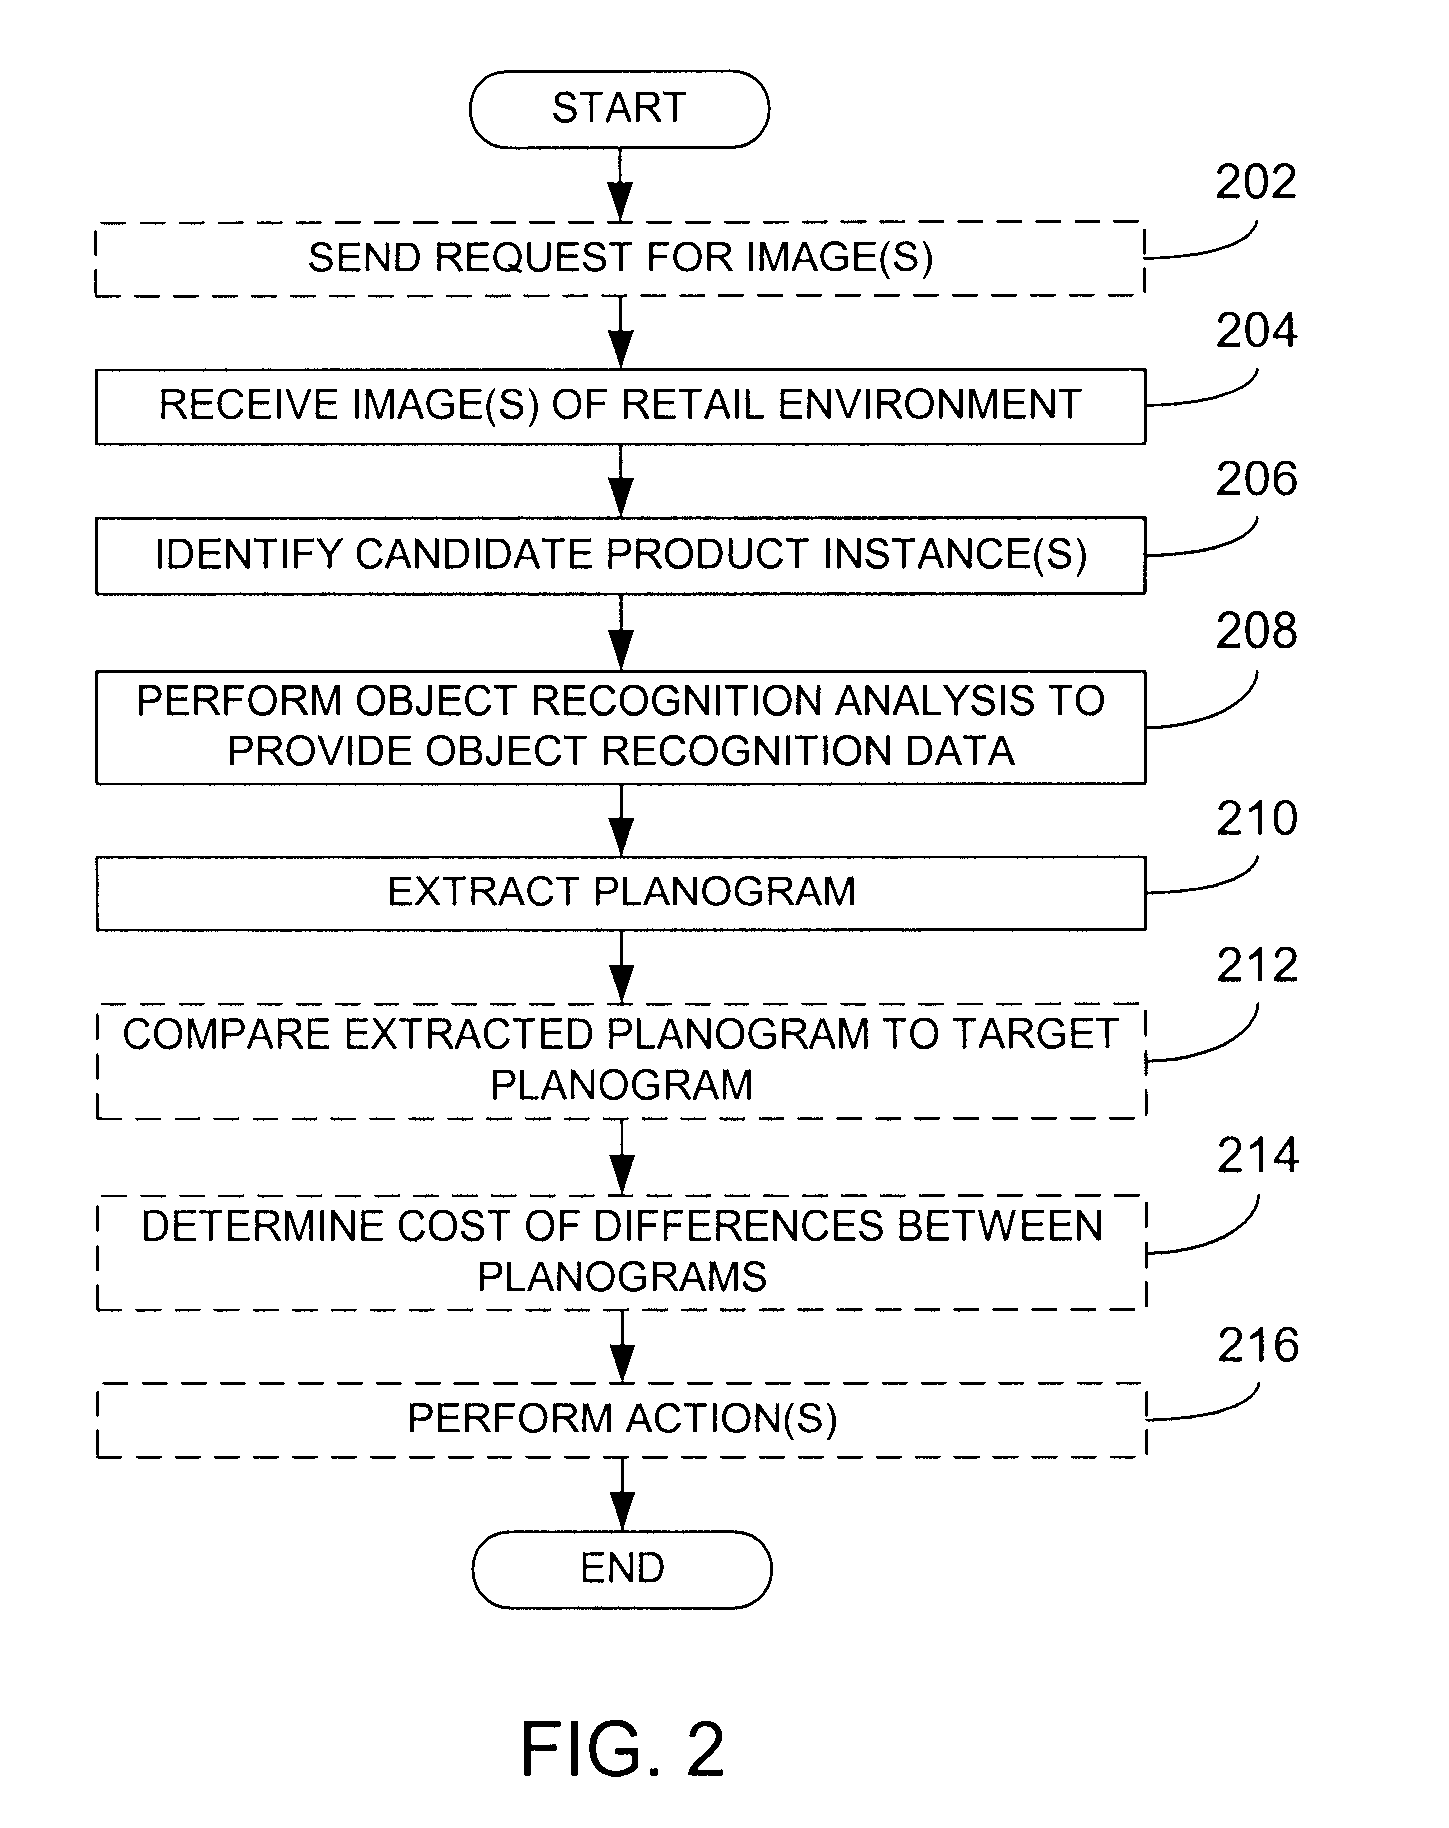 Determination Of Inventory Conditions Based On Image Processing